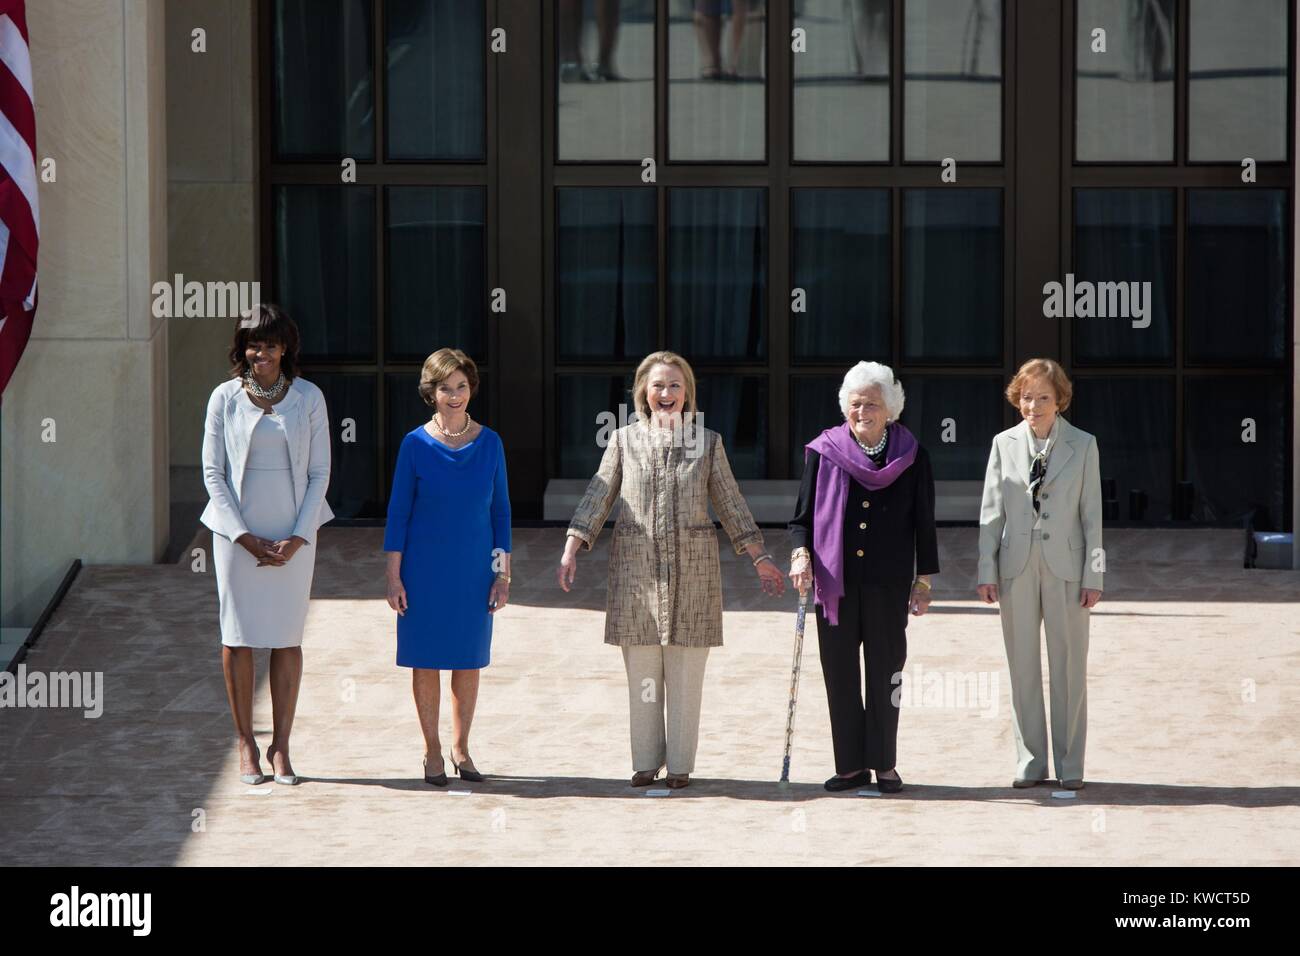 First Lady Michelle Obama poses with former First Ladies, April 25, 2013. L-R: Michelle Obama; Laura Bush; Hillary Rodman Clinton; Barbara Bush; Rosalynn Carter. They were attending the dedication of the George W. Bush Presidential Library and Museum, Southern Methodist University, Dallas, Texas. (BSLOC 2015 3 50) Stock Photo